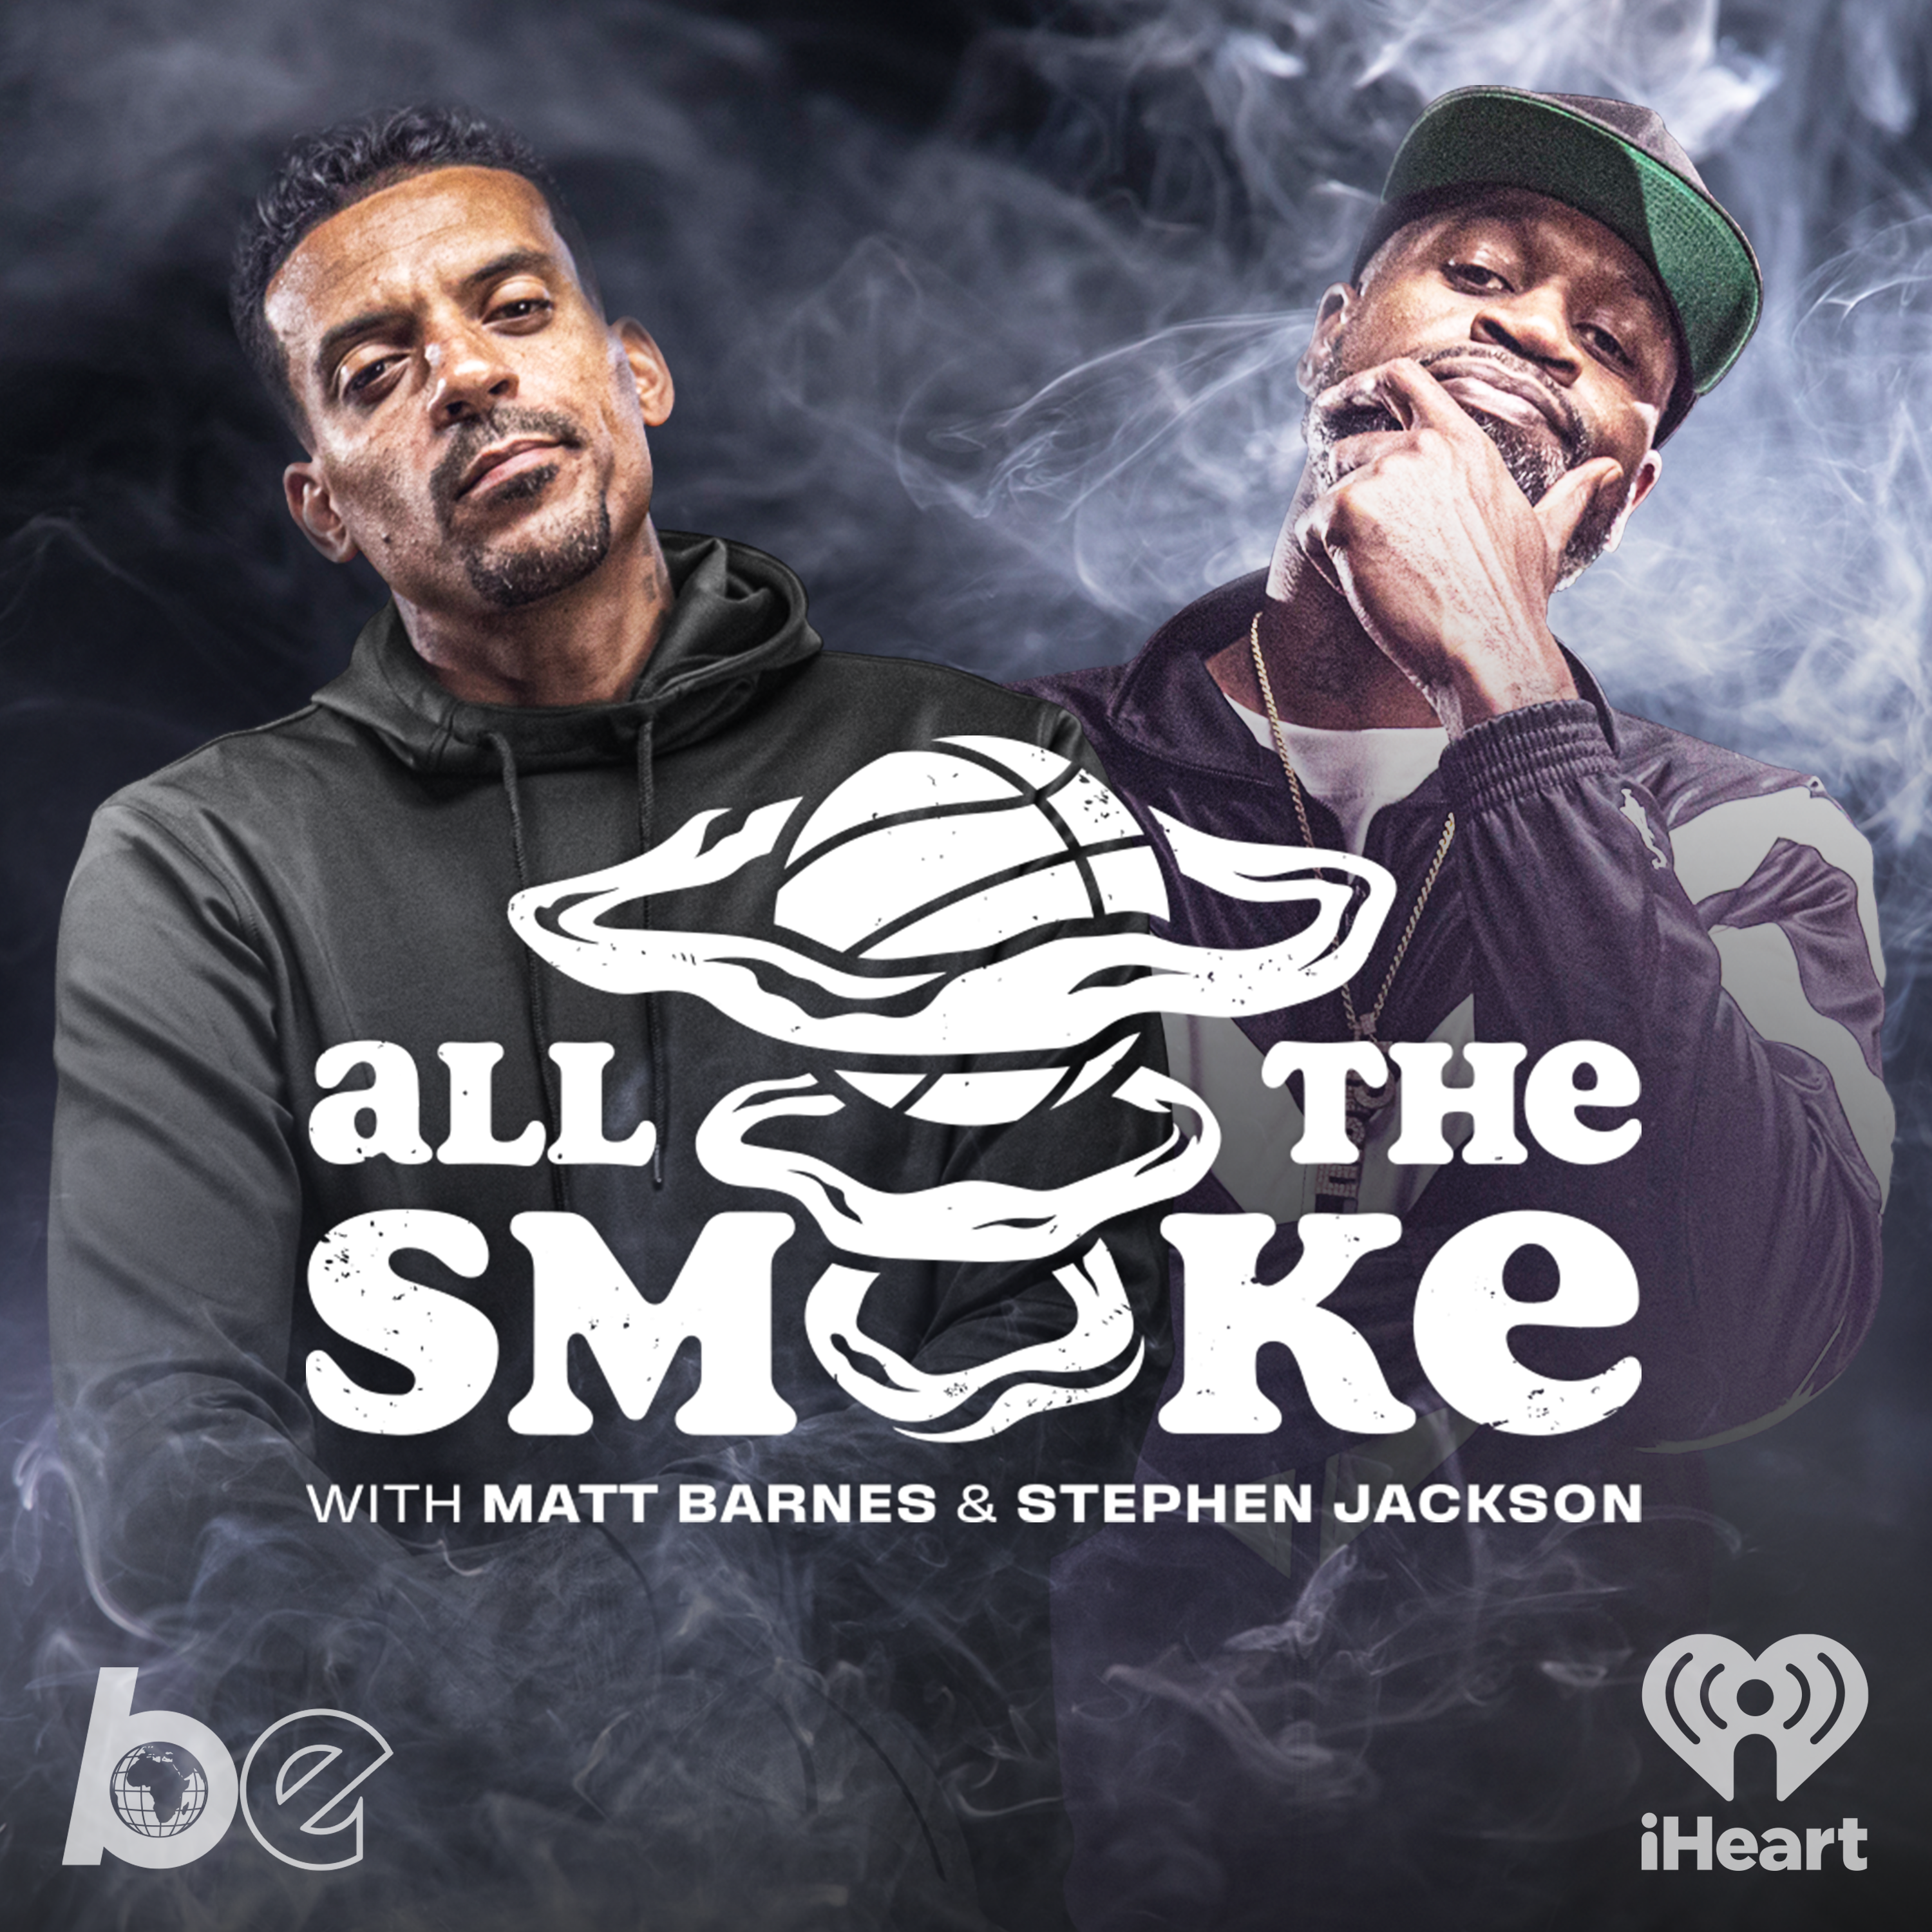 Pat McAfee On Why He’s Living “The Dumbest Life Of All-Time" | Ep 221 | ALL THE SMOKE